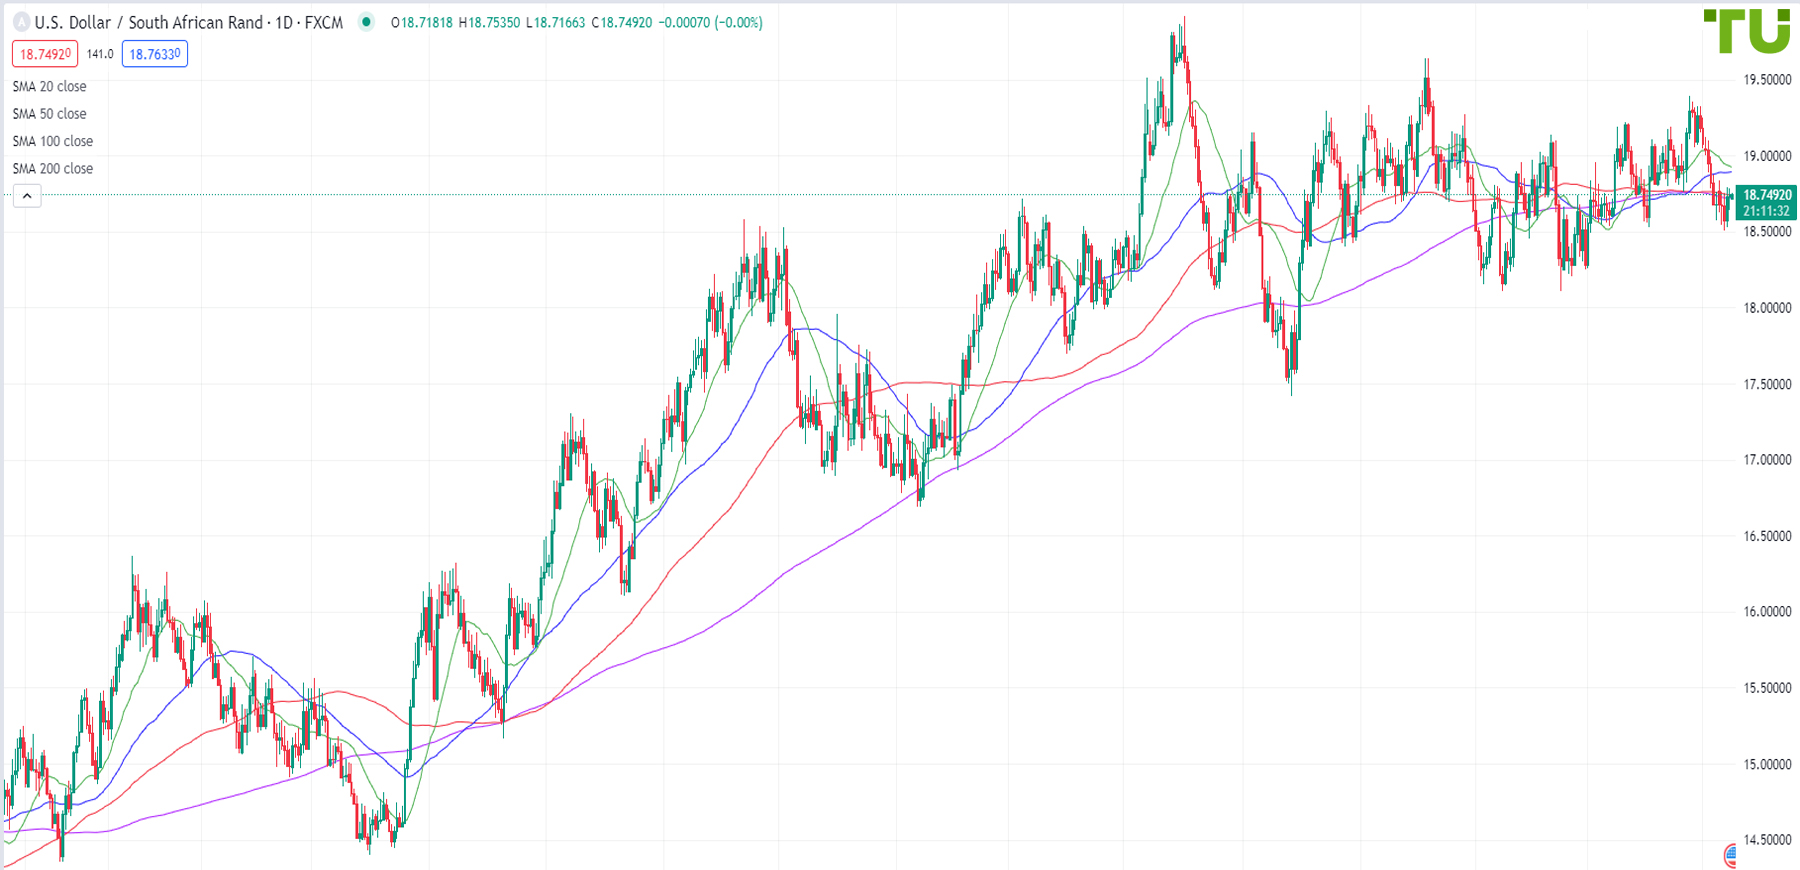 USD/ZAR is trying to continue rising